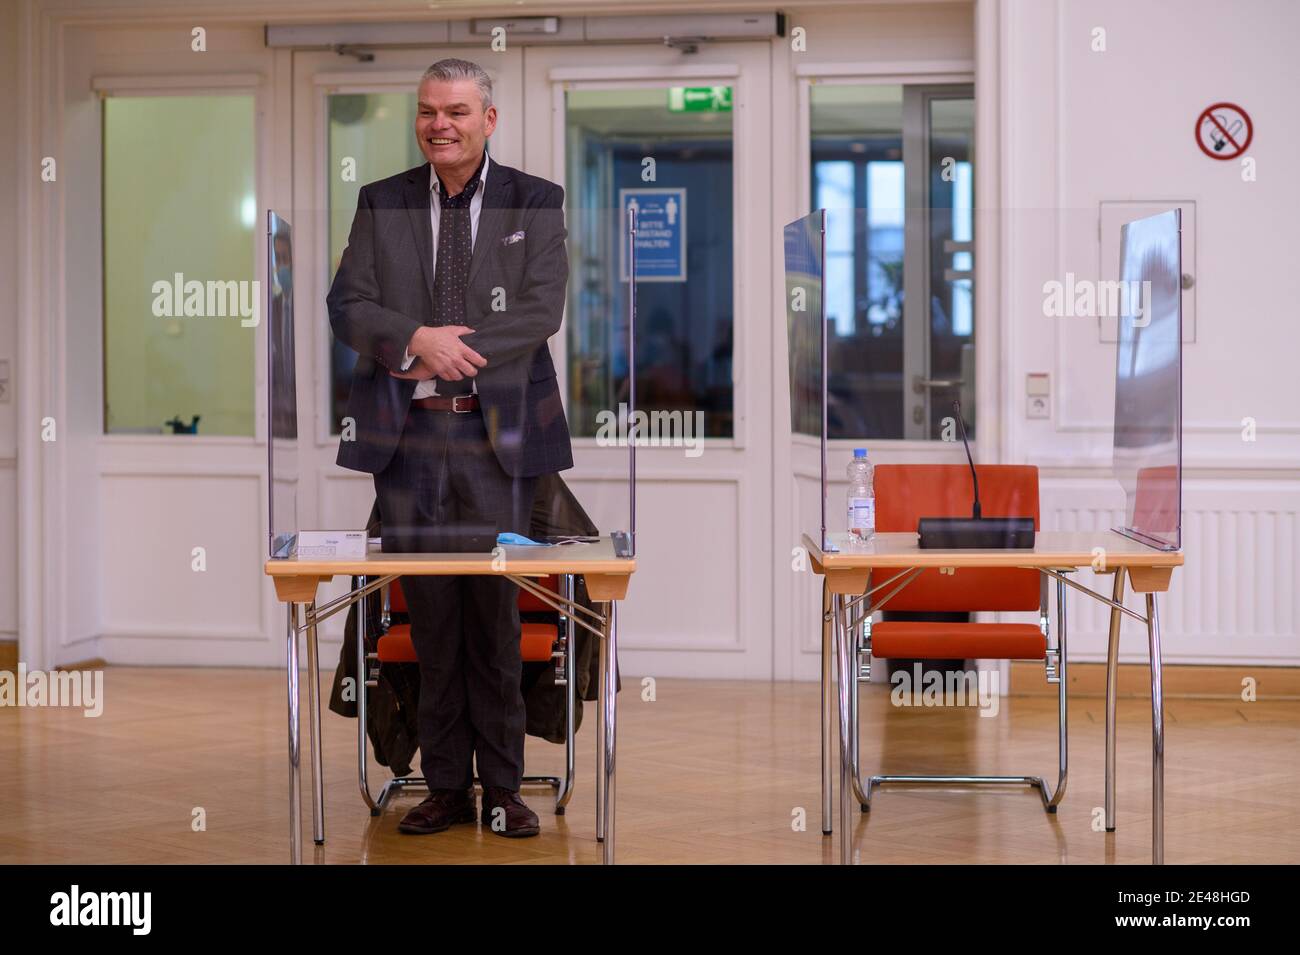 22 January 2021, Saxony-Anhalt, Magdeburg: Holger Stahlknecht (CDU), former Minister of the Interior of Saxony-Anhalt, arrives in the state parliament for the meeting of the Lotto Investigation Committee. There, the politician was questioned as a witness. It is the penultimate meeting of the U-committee before the end of the taking of evidence. The U-committee is working on the events in a Zerbst lottery shop, where a few players won millions. Several organized big players, among them the shop owner, could achieve high profits, also because Landes-Lotto approved a higher play limit. The manage Stock Photo